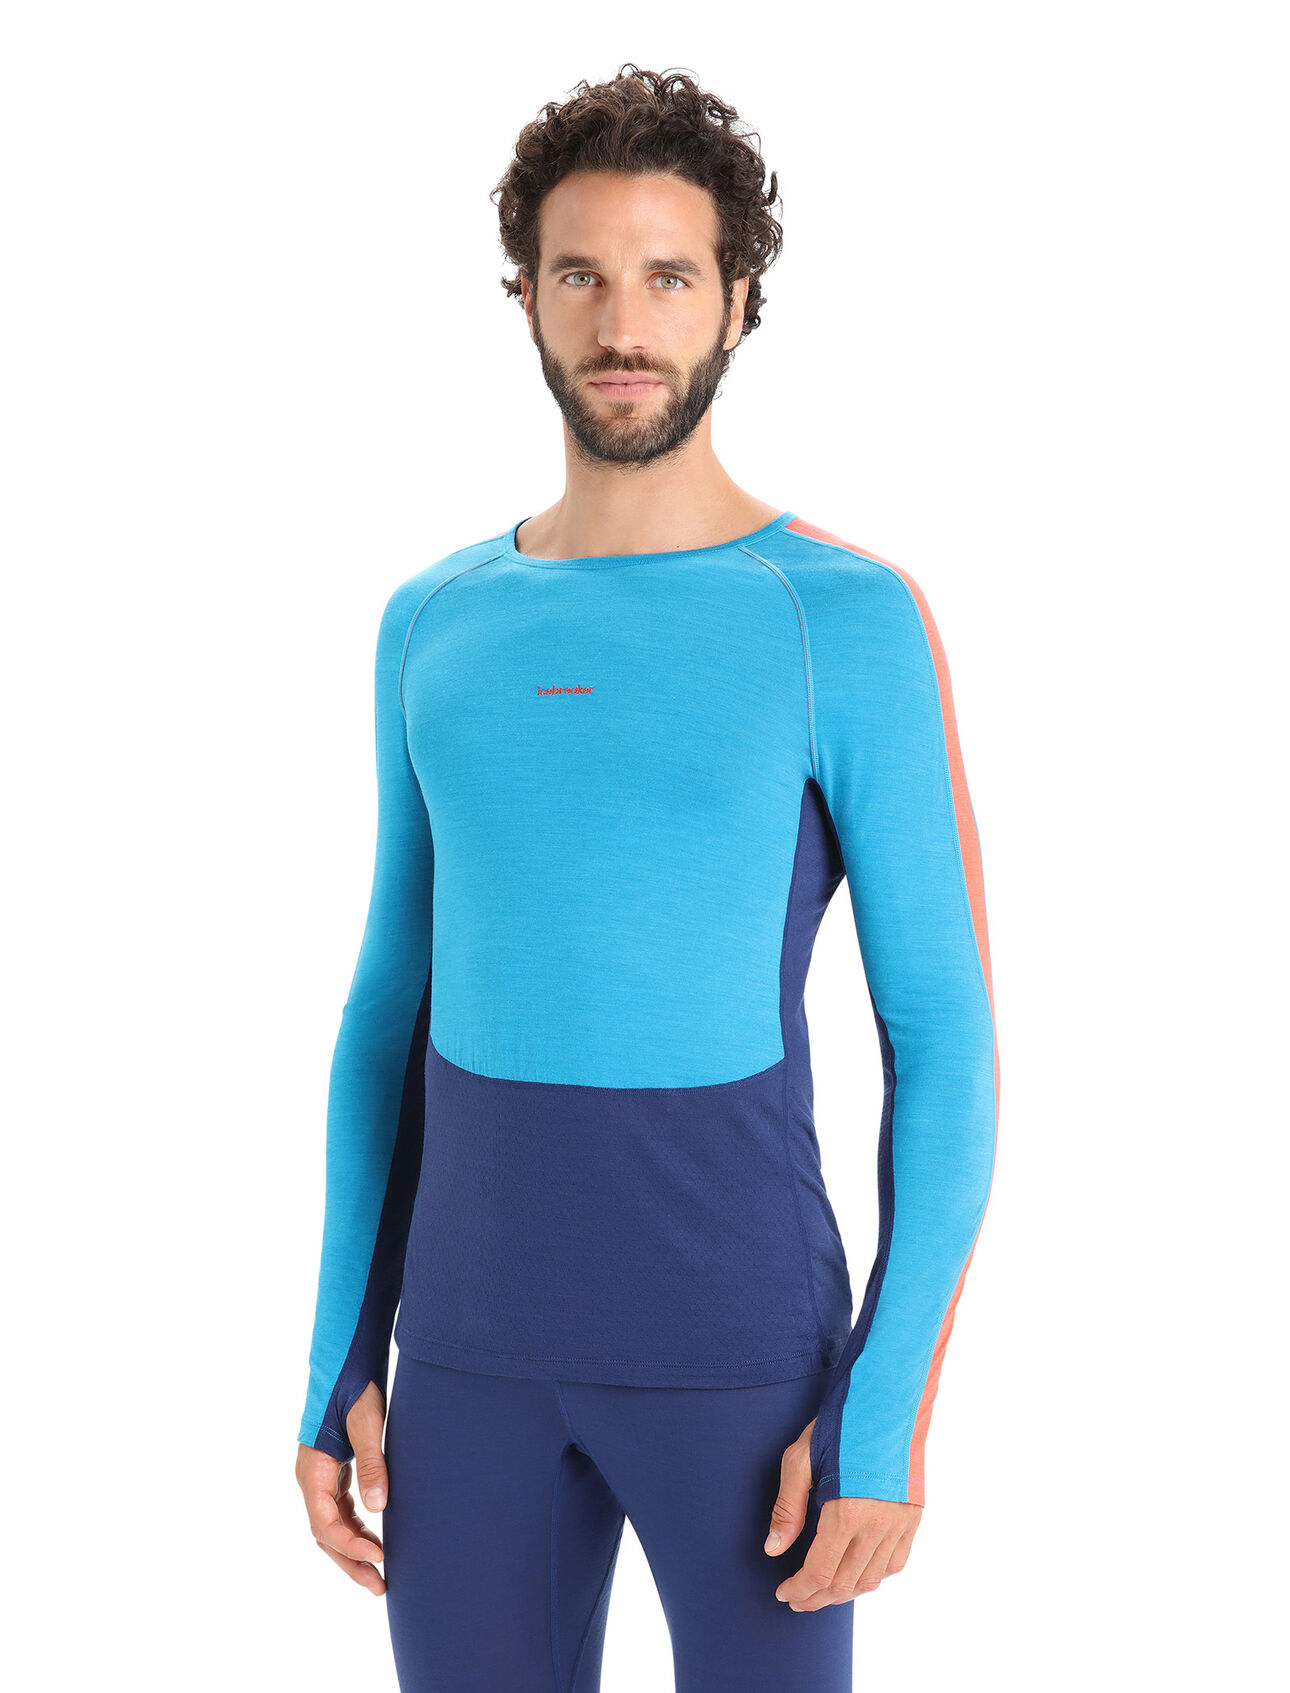 Mens 125 ZoneKnit™ Merino Long Sleeve Crewe Thermal Top An ultralight merino base layer top designed to help regulate body temperature during high-intensity activity, the 125 ZoneKnit™ Long Sleeve Crewe features our jersey Cool-Lite™ fabric for adventure and everyday training.